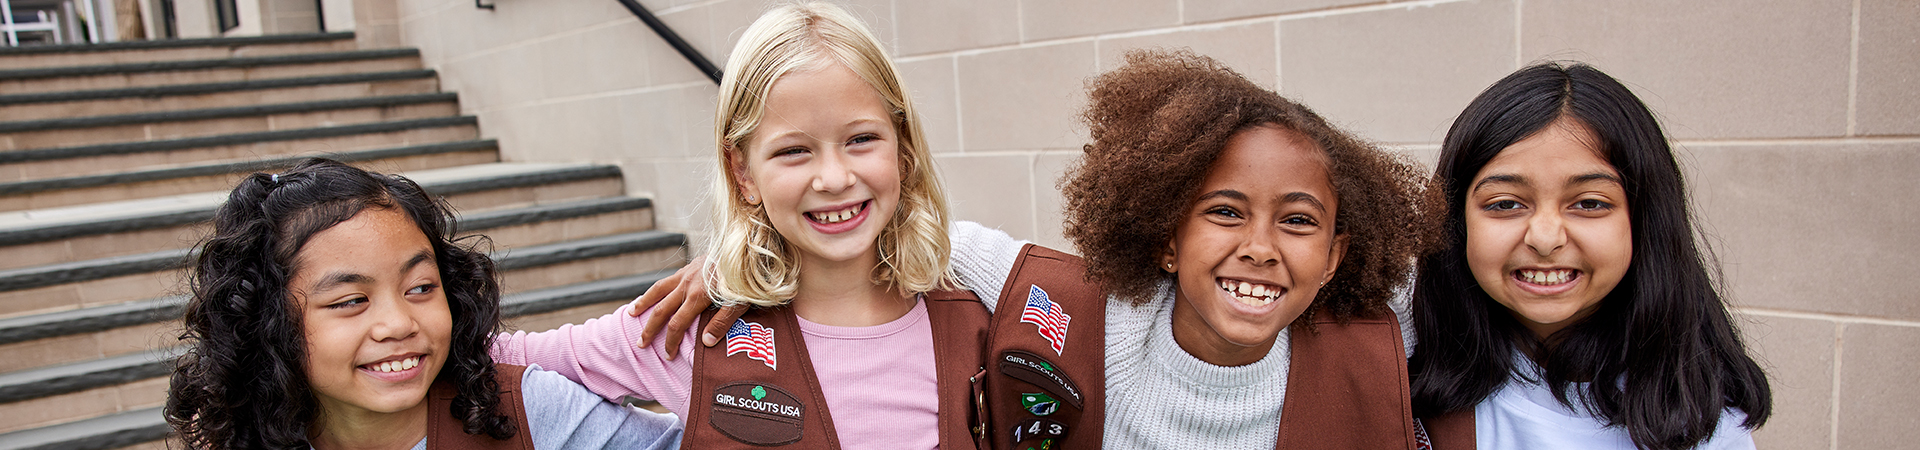  group of diverse girl scouts outside with protest signs 